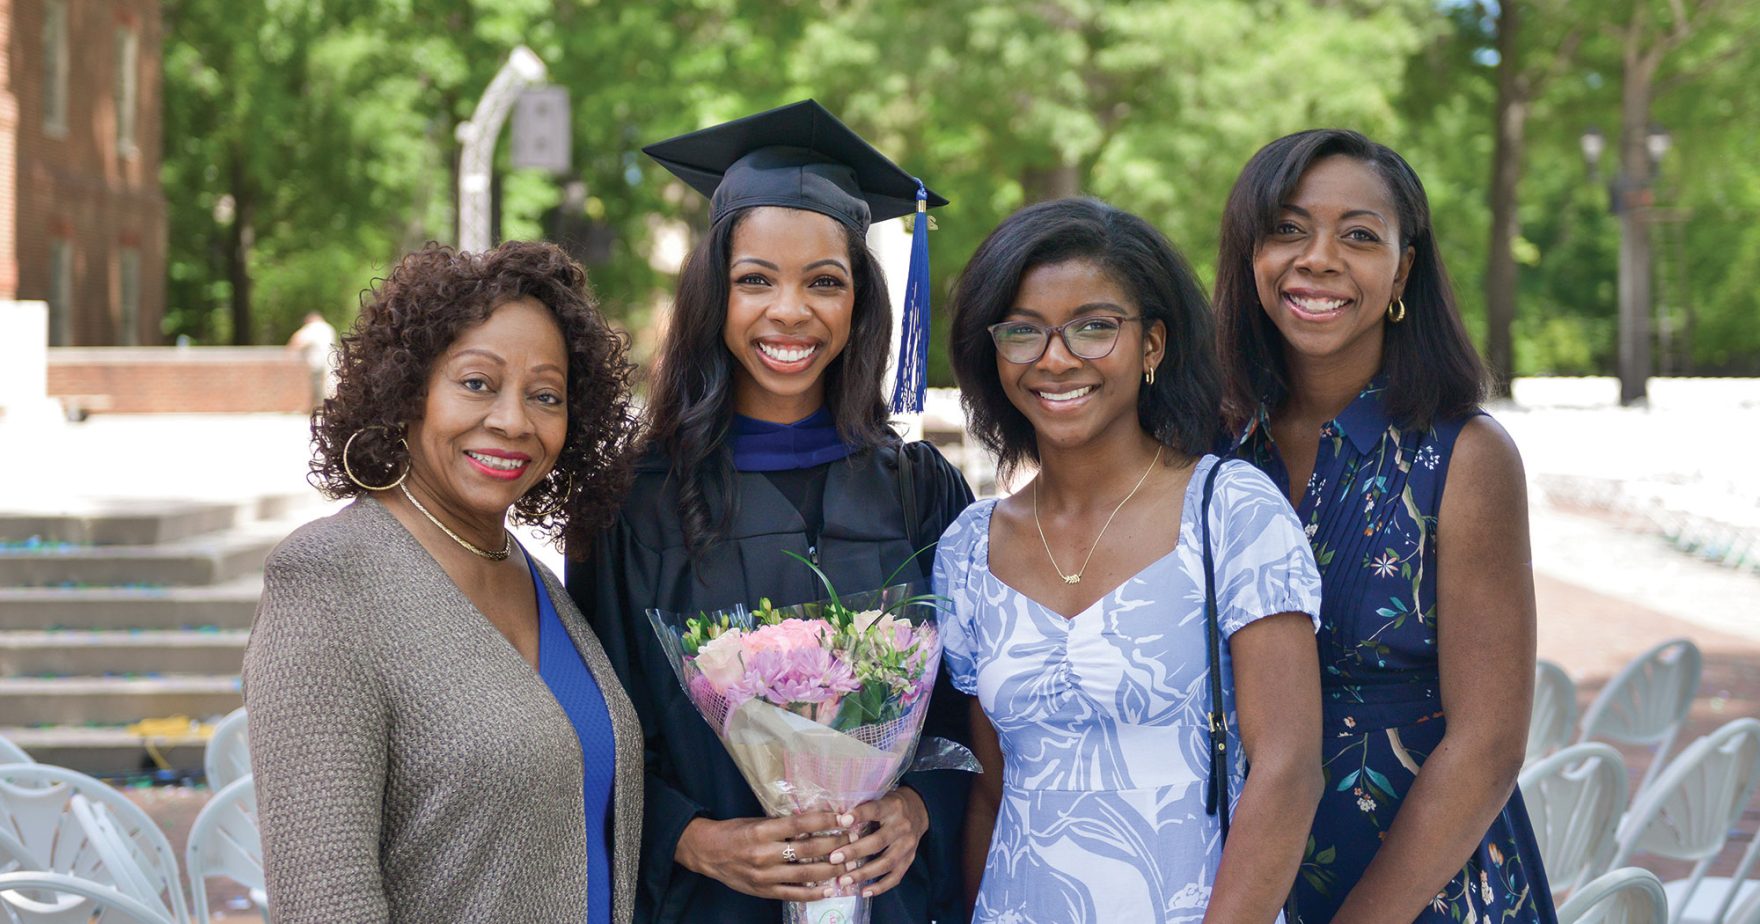 Recent graduate smiling with her parents: resources for parents of college students